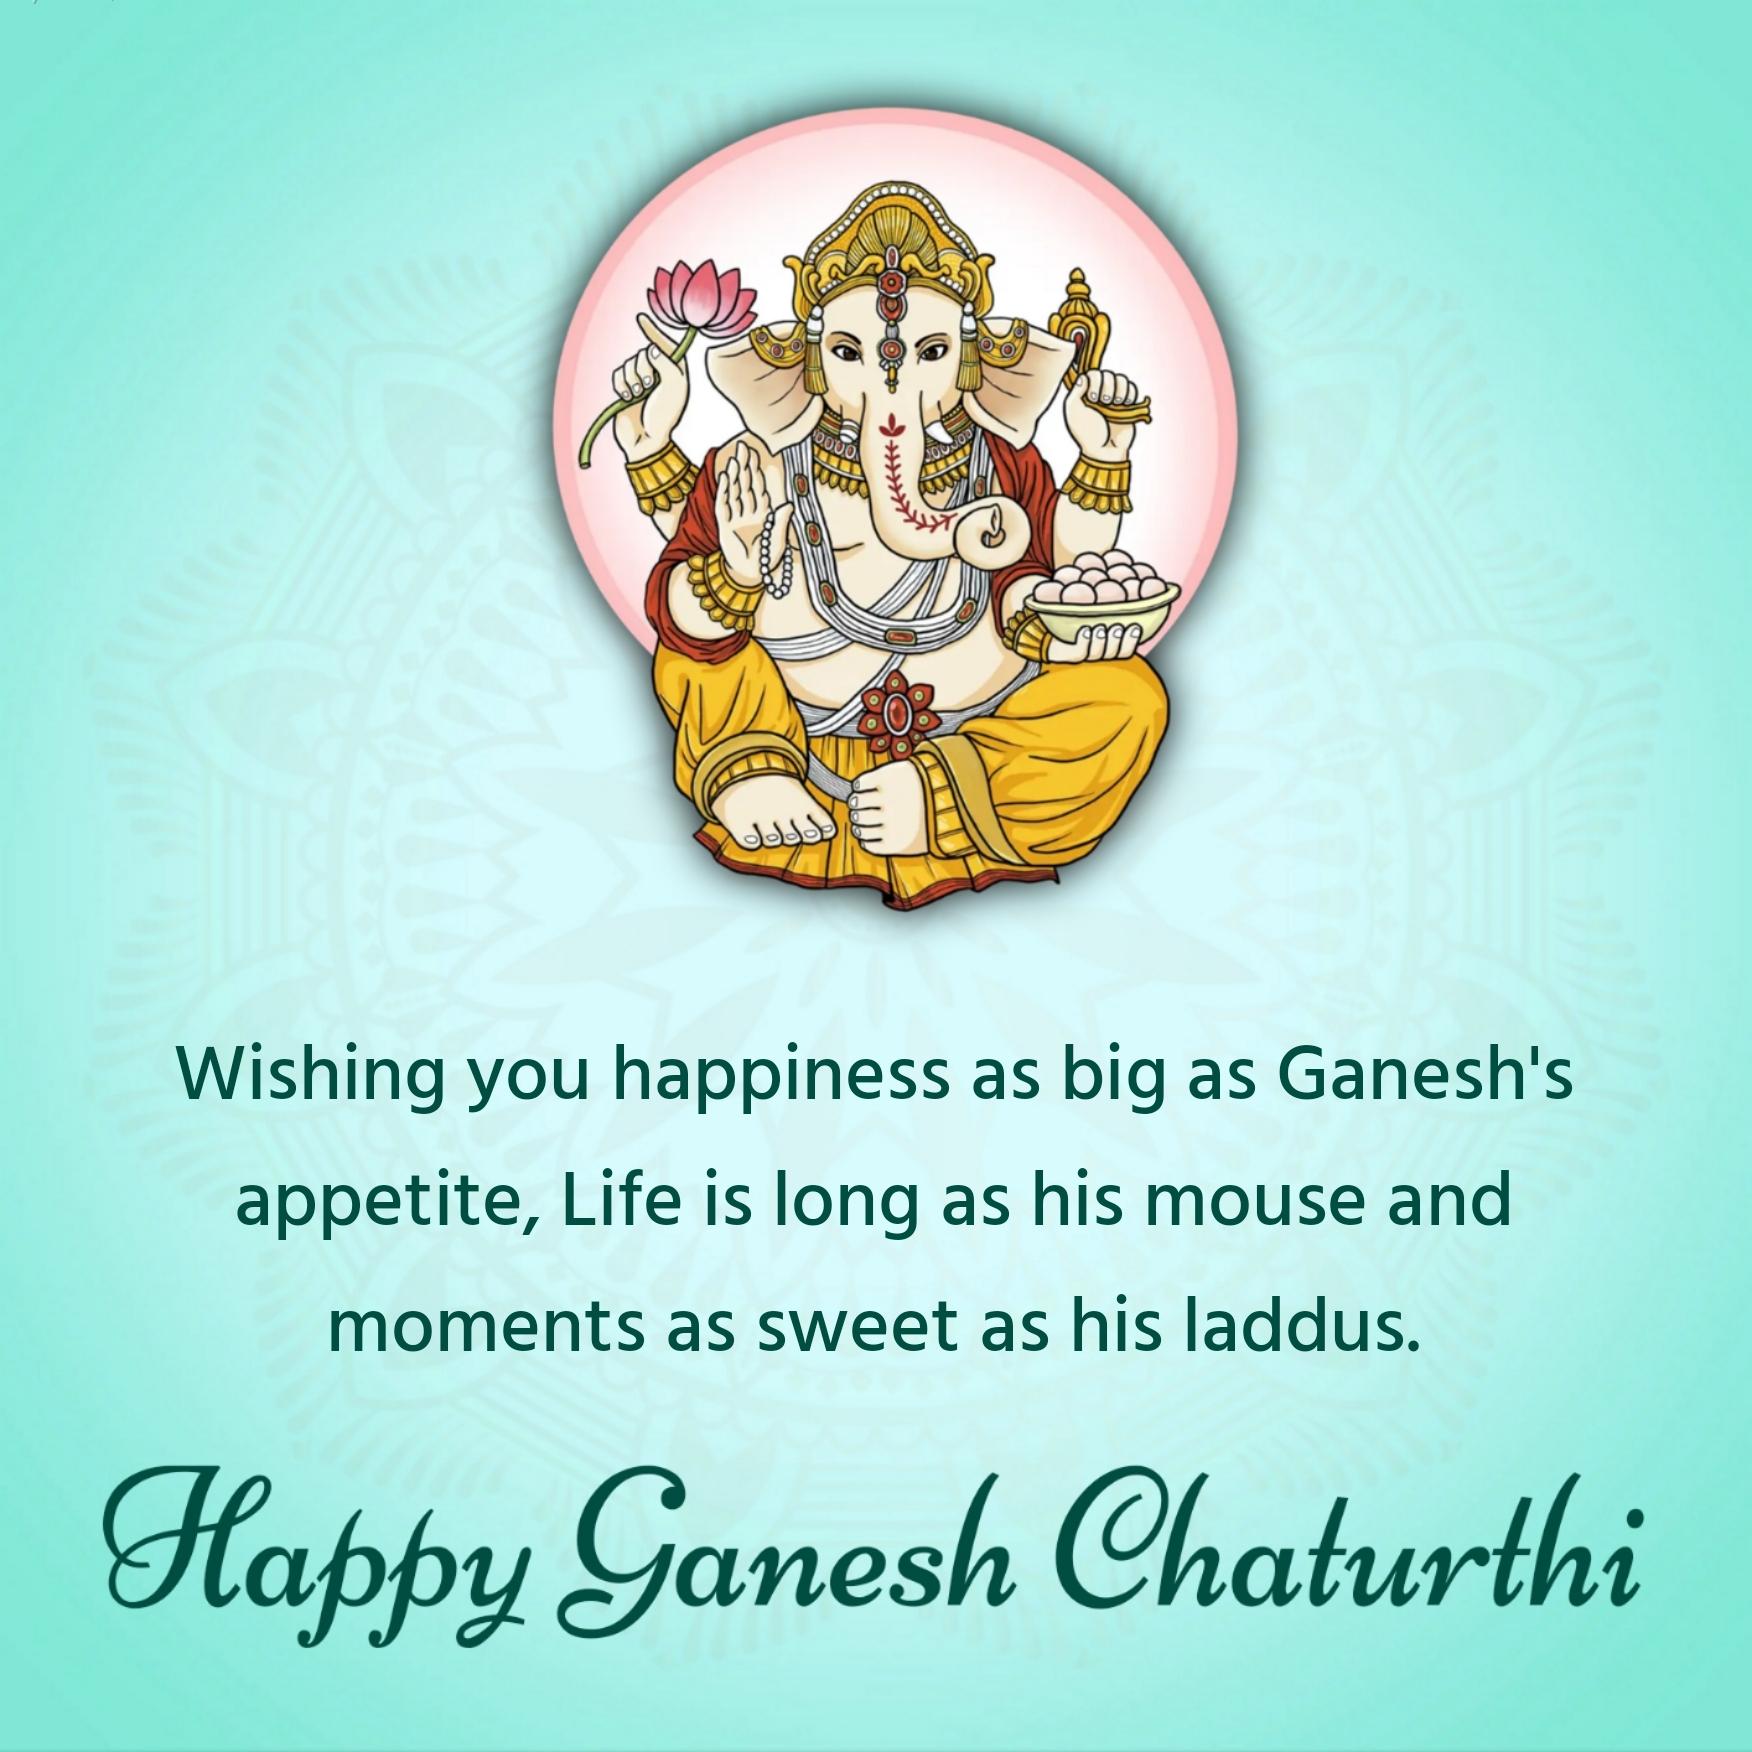 Wishing you happiness as big as Ganesh's appetite